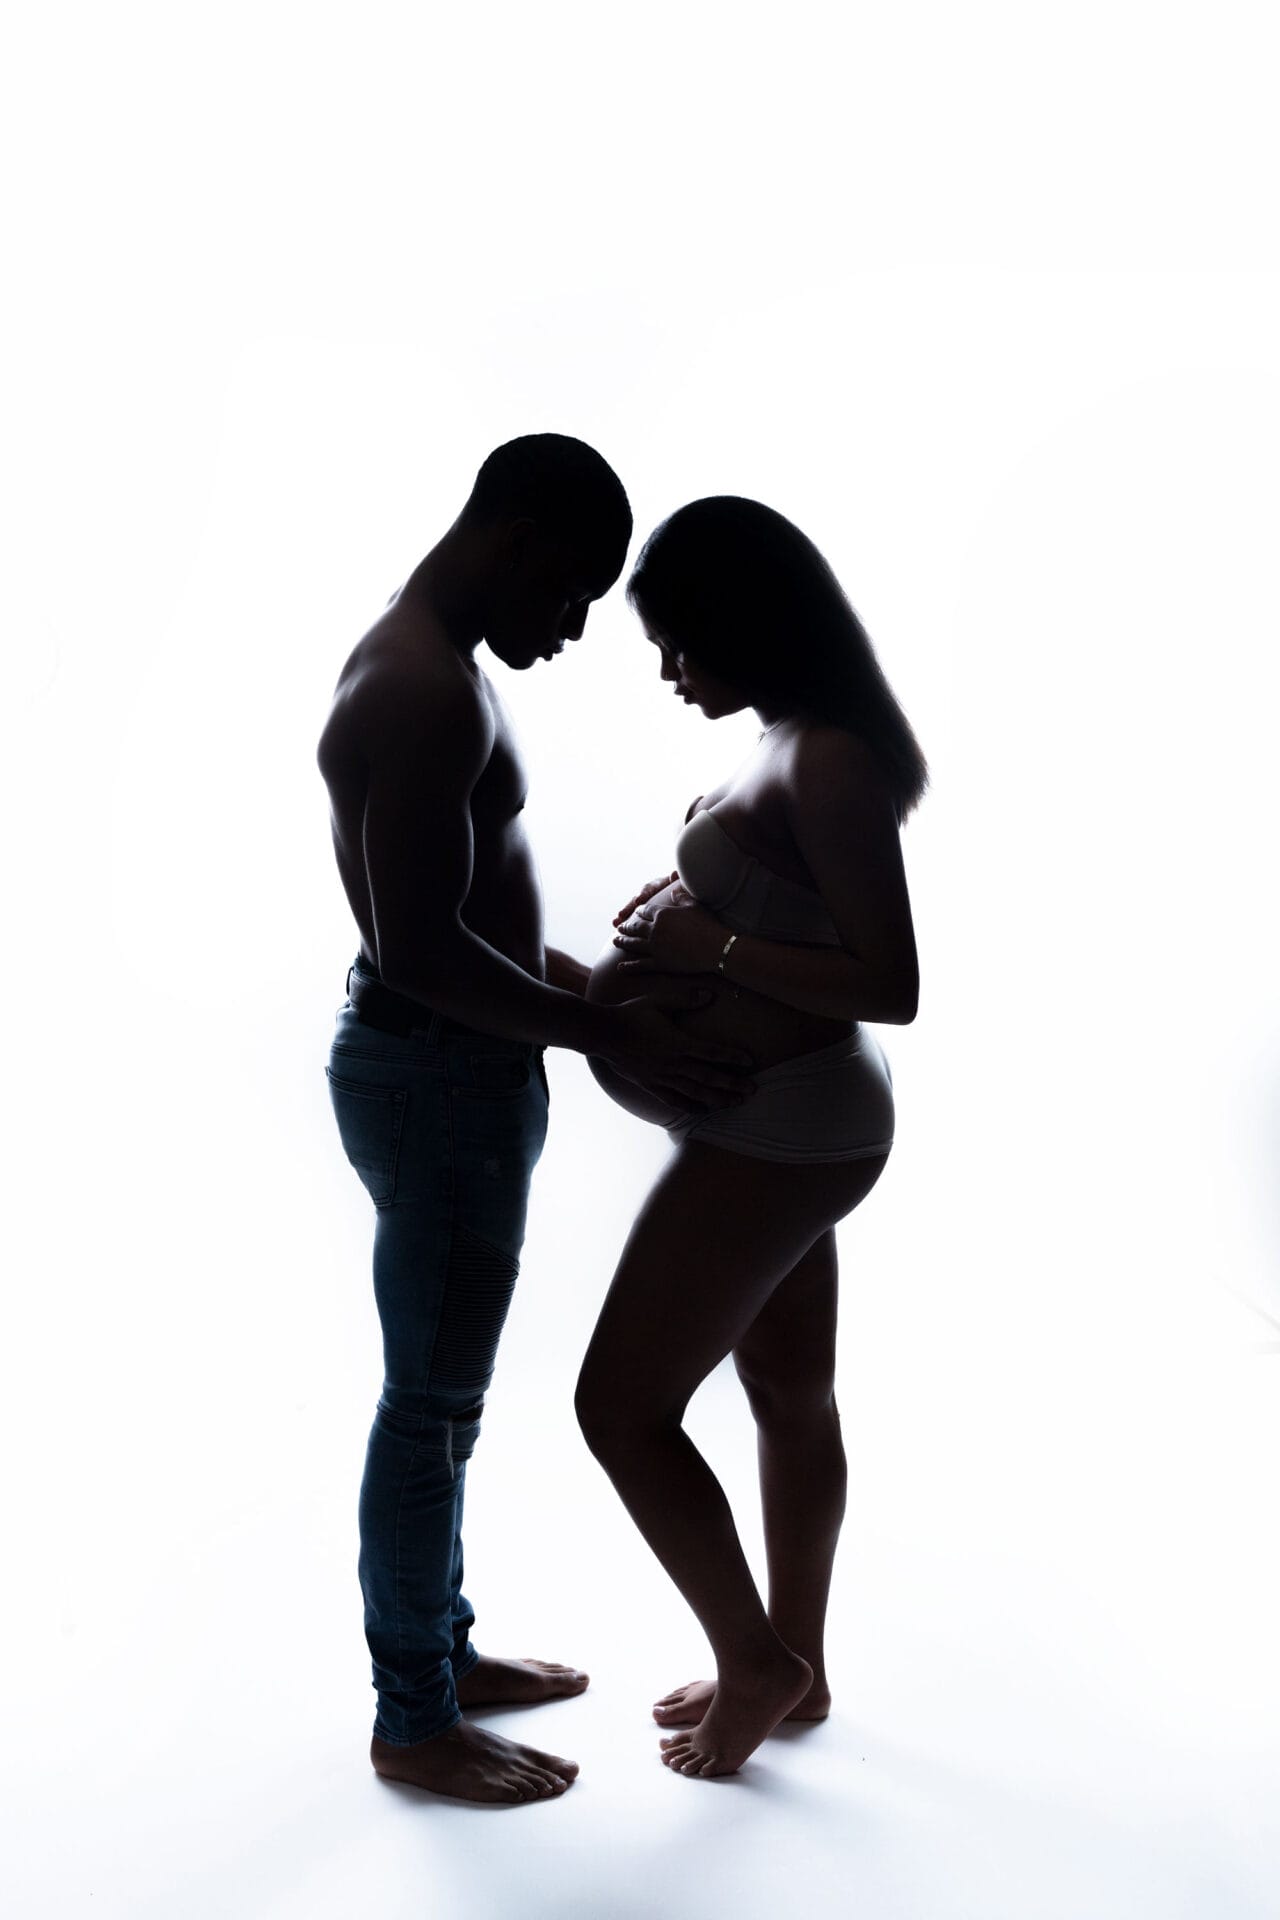 A silhouette of an Expecting couple in the studio for their maternity face-to-face session, standing, embracing her pregnant belly.